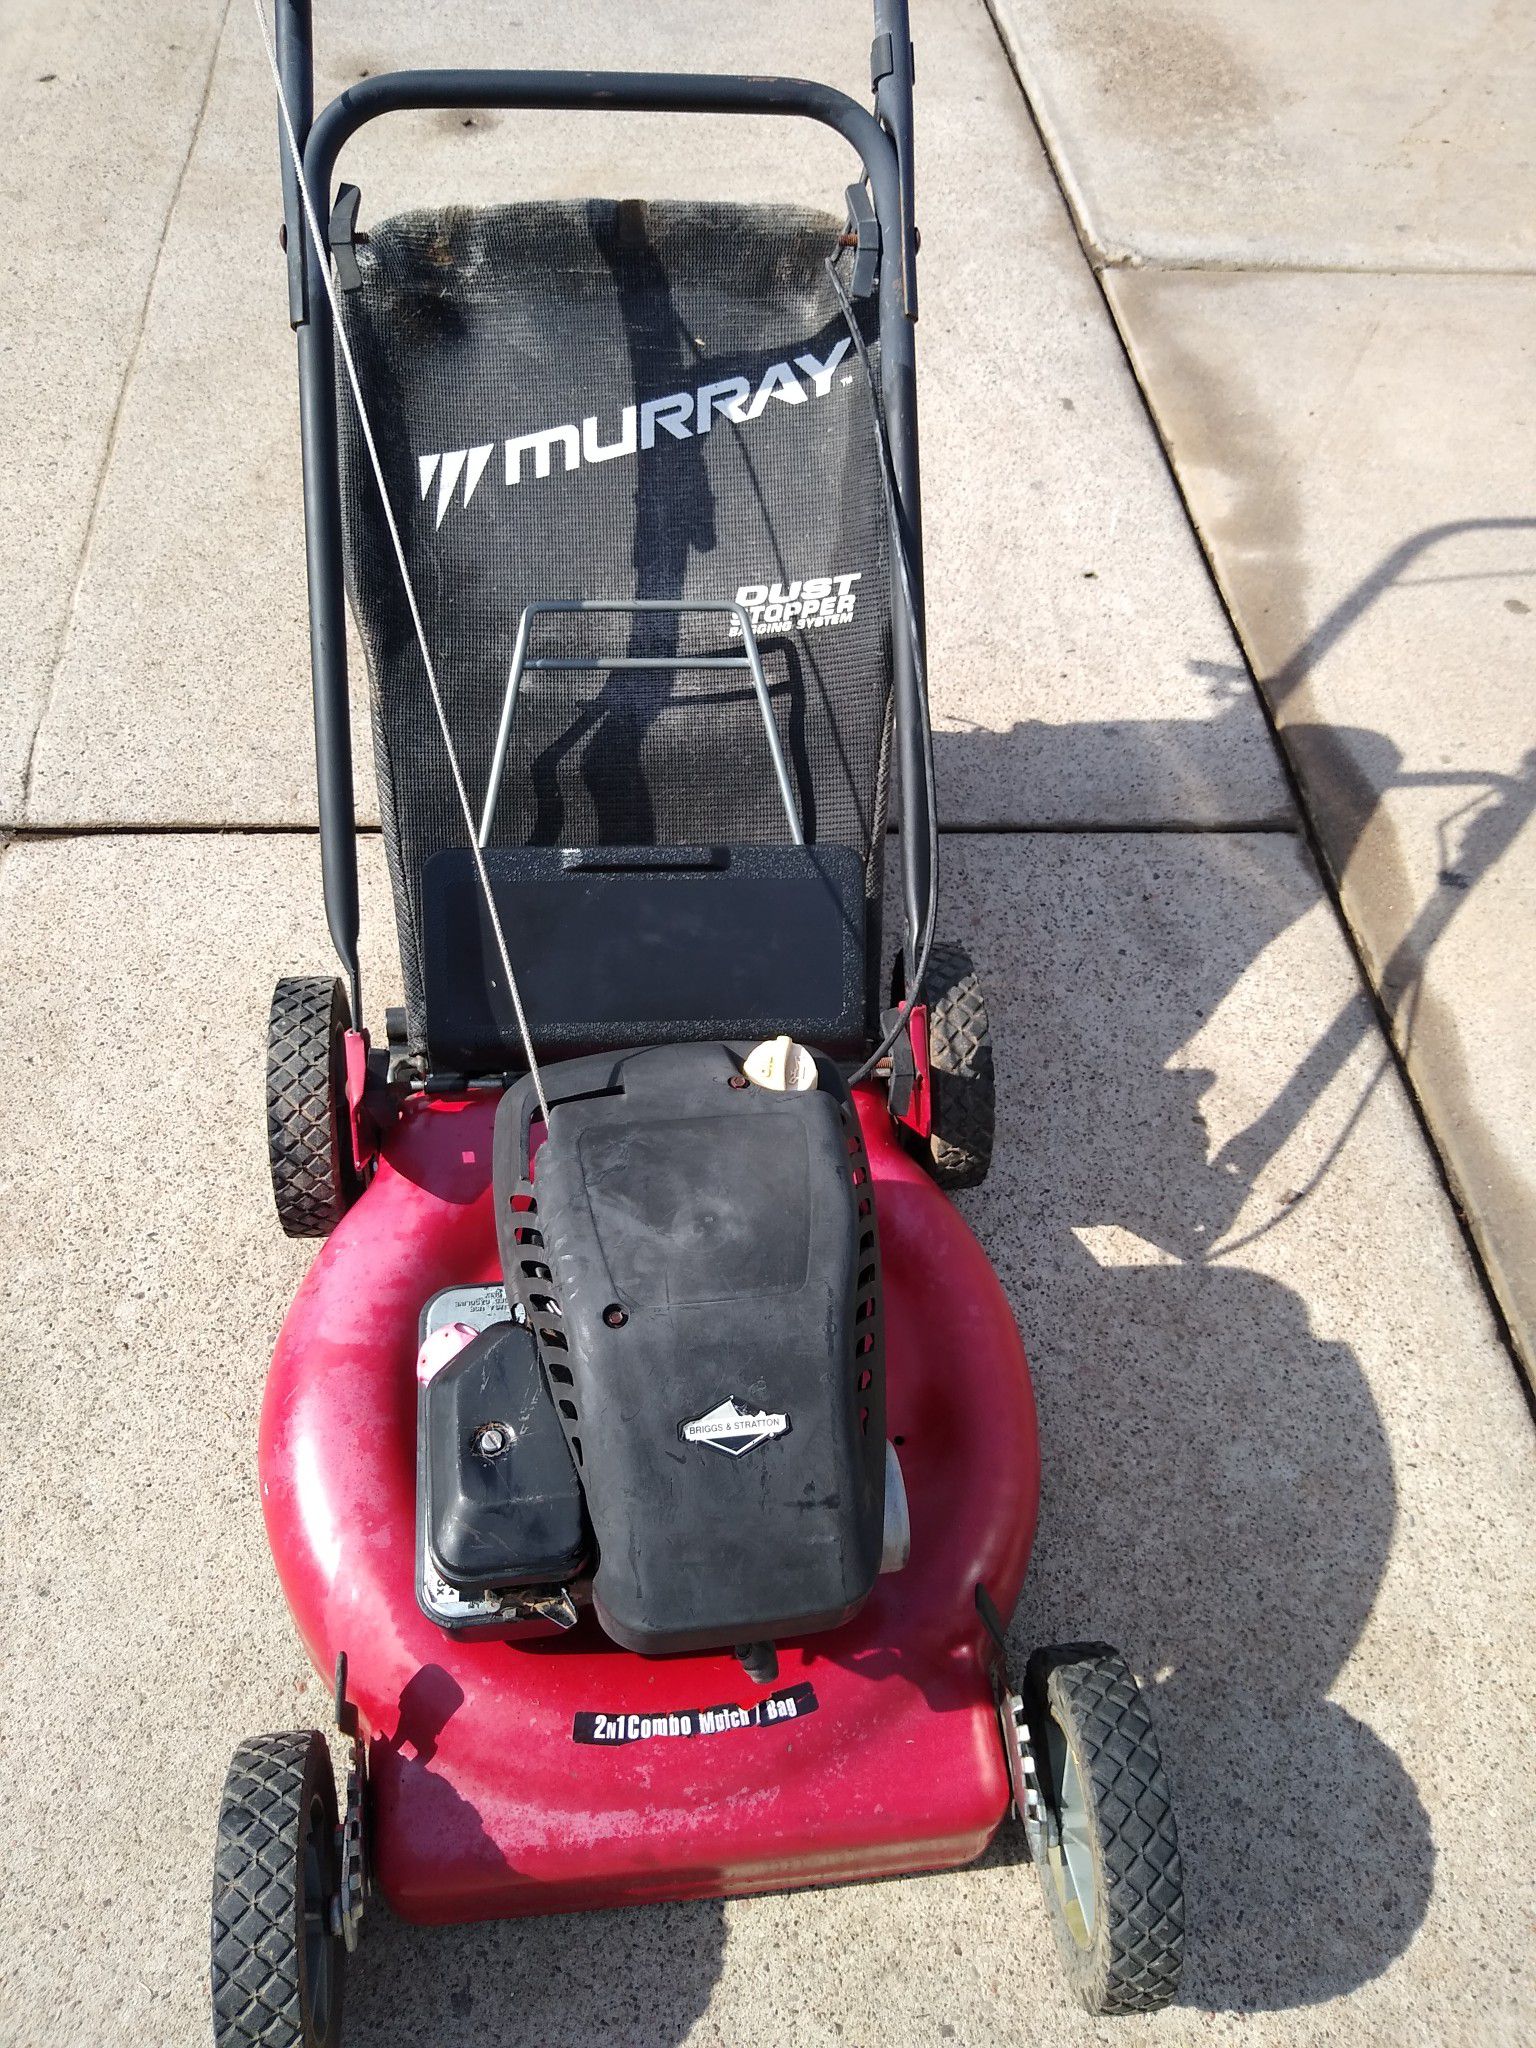 Briggs and Stratton rear bagging mulching gas lawnmower runs good and strong